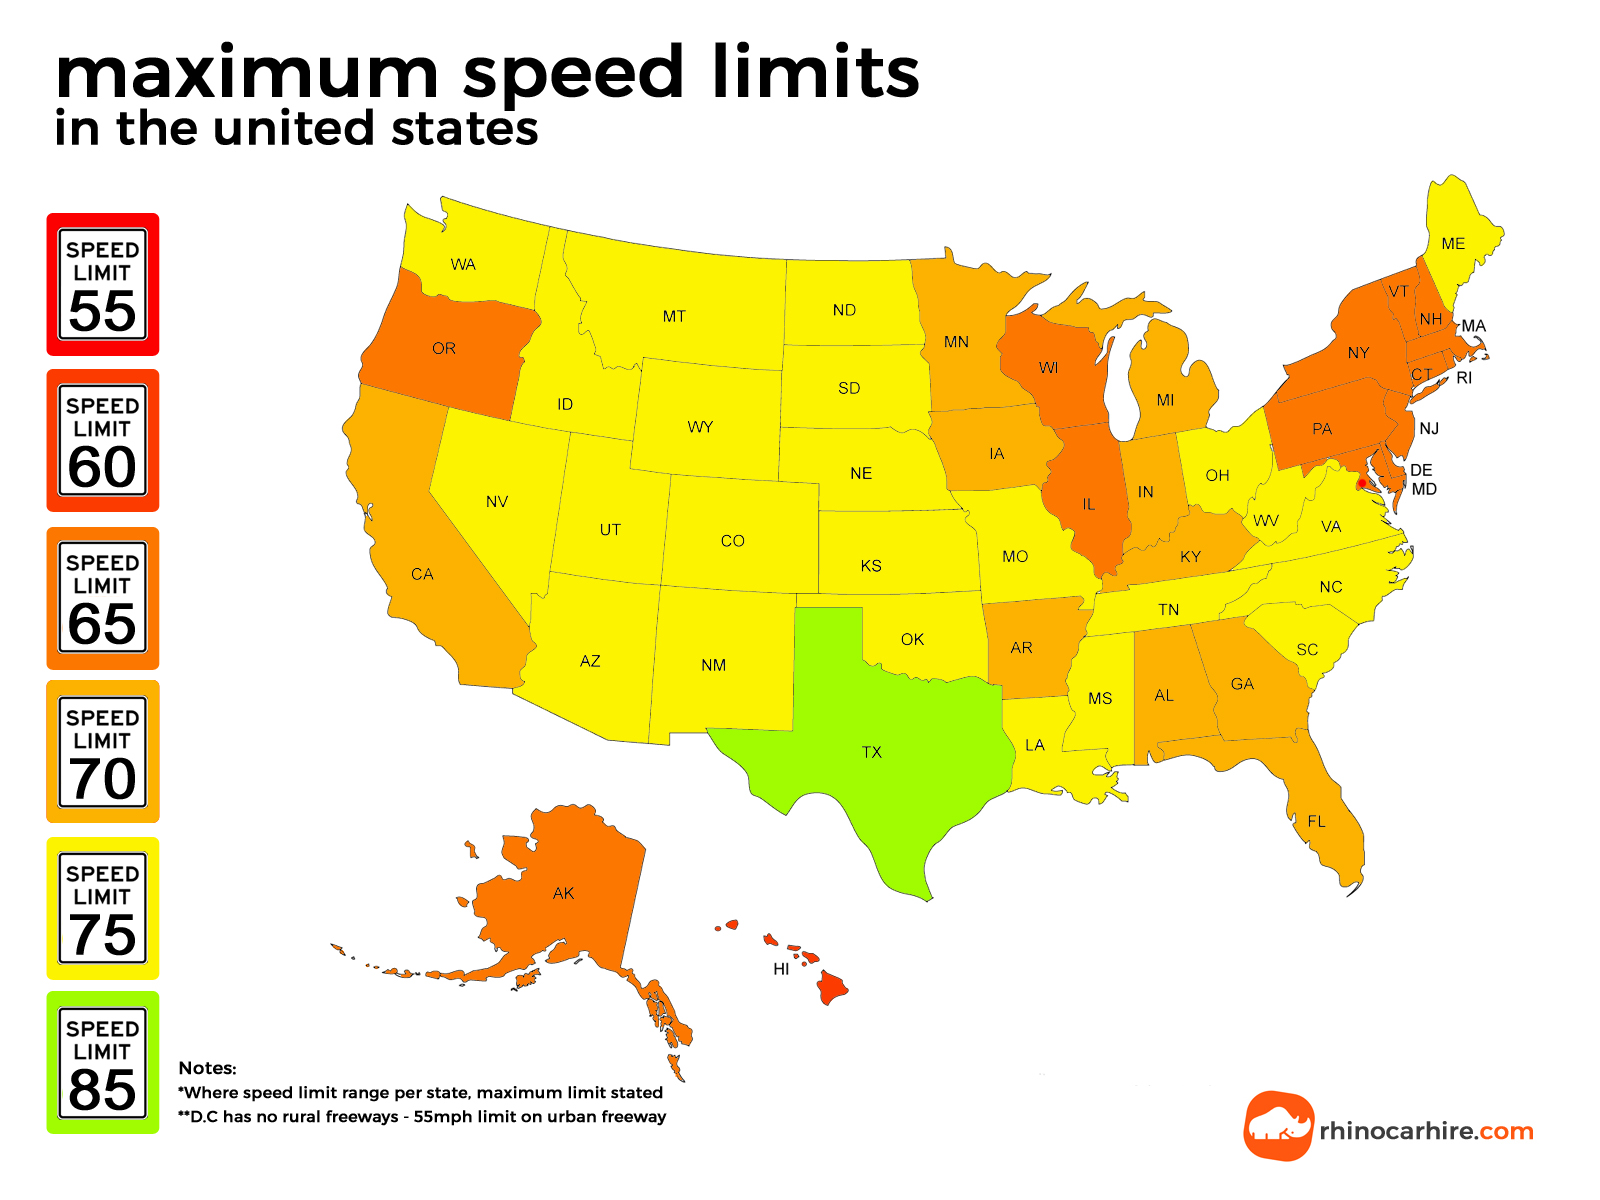 What is the highest speed limit in USA?